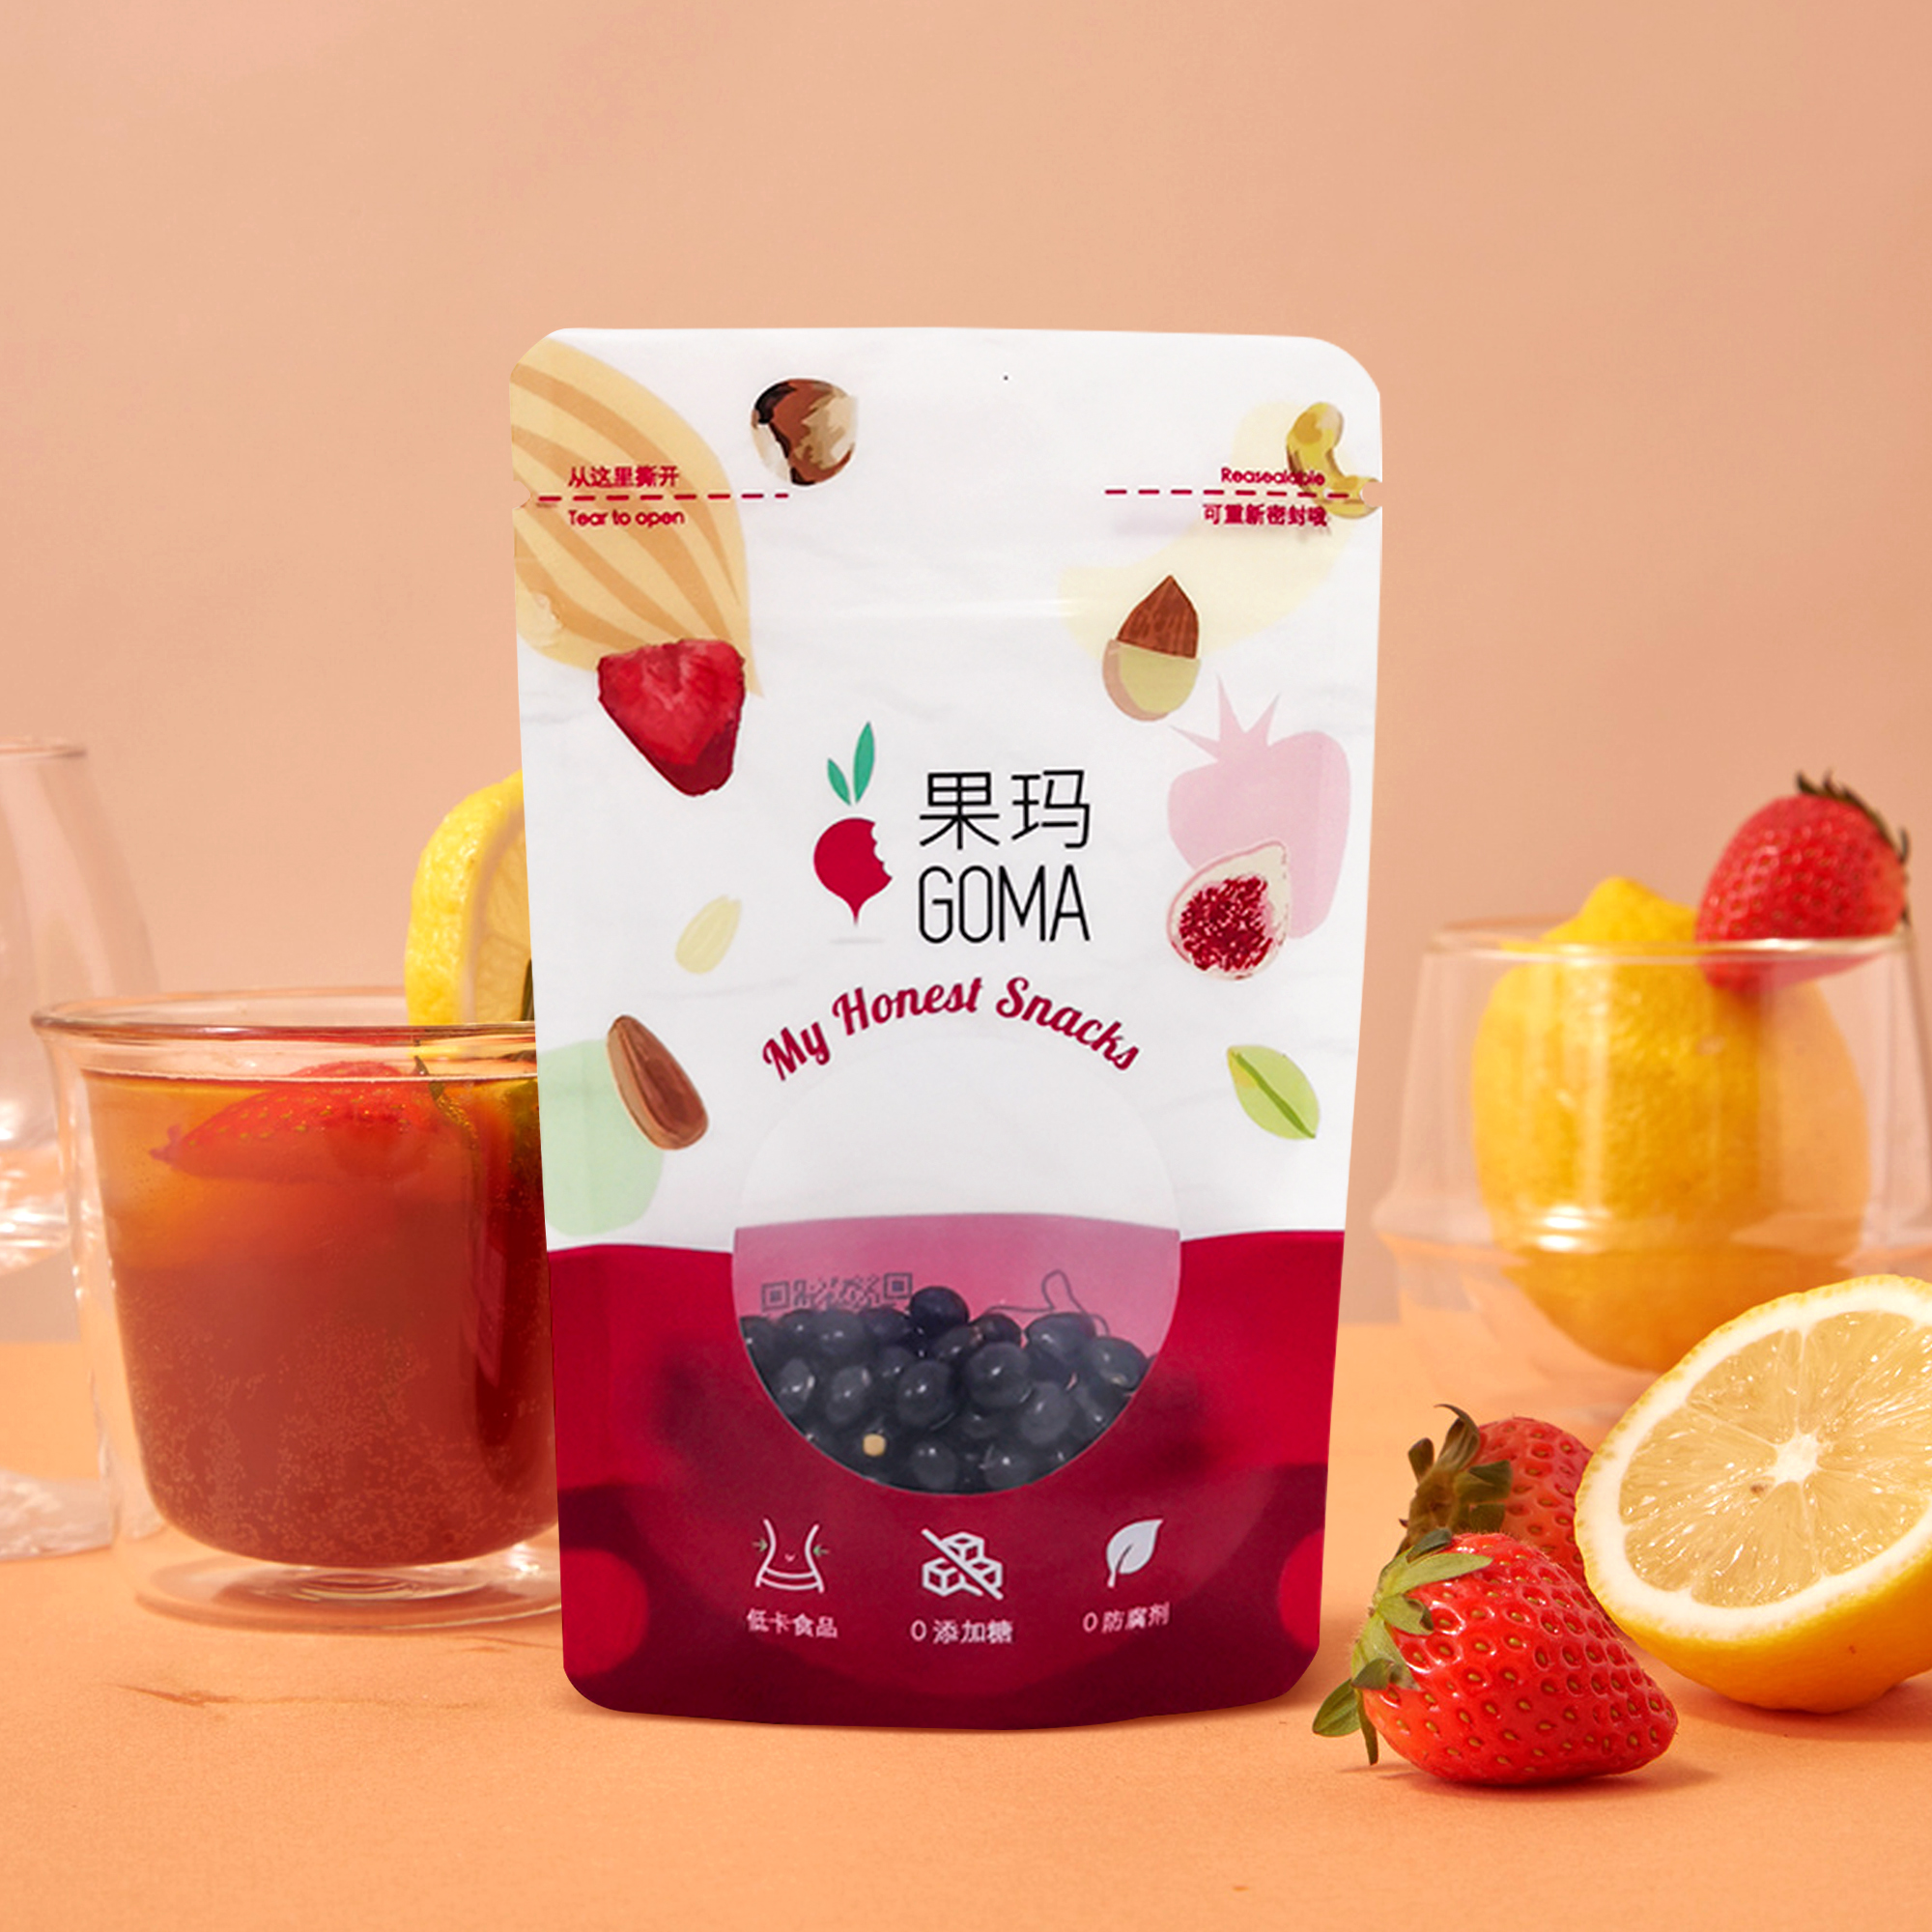 Recyclable Standing Up Pouches Organic Supersnacks Bags with Window